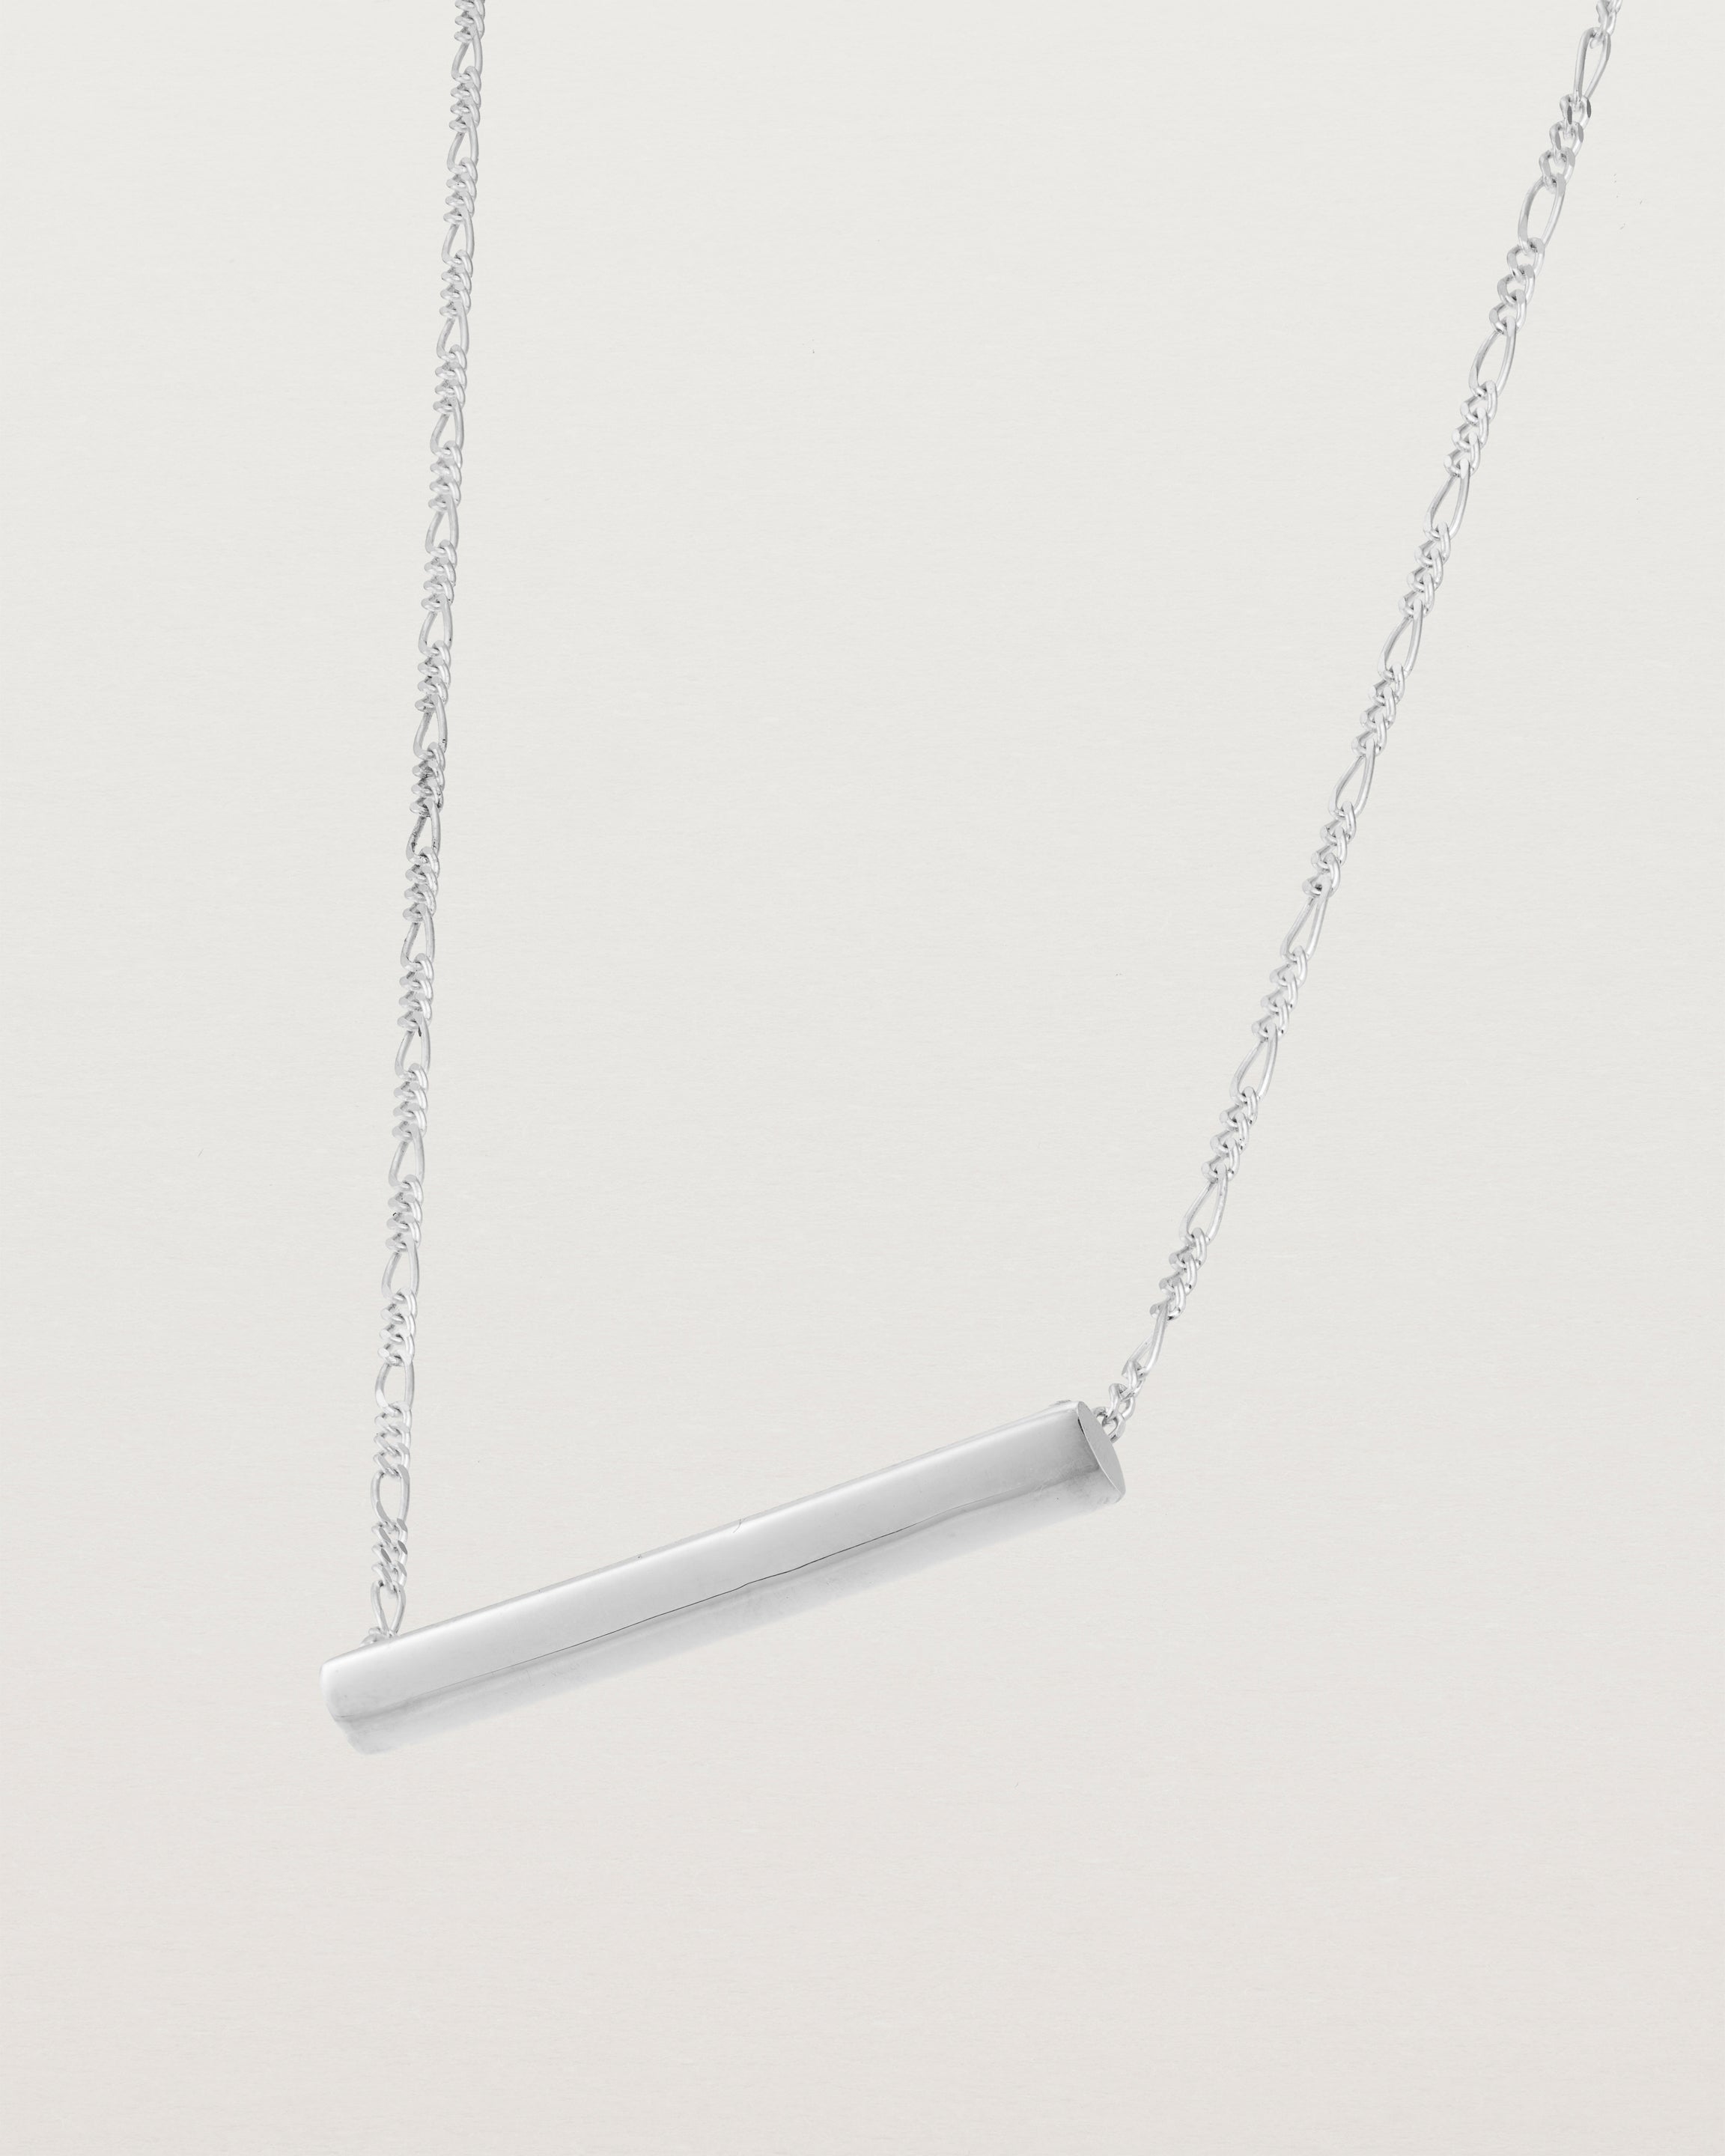 side view of Ellipse necklace with a silver bar hanging from a chain in sterling silver